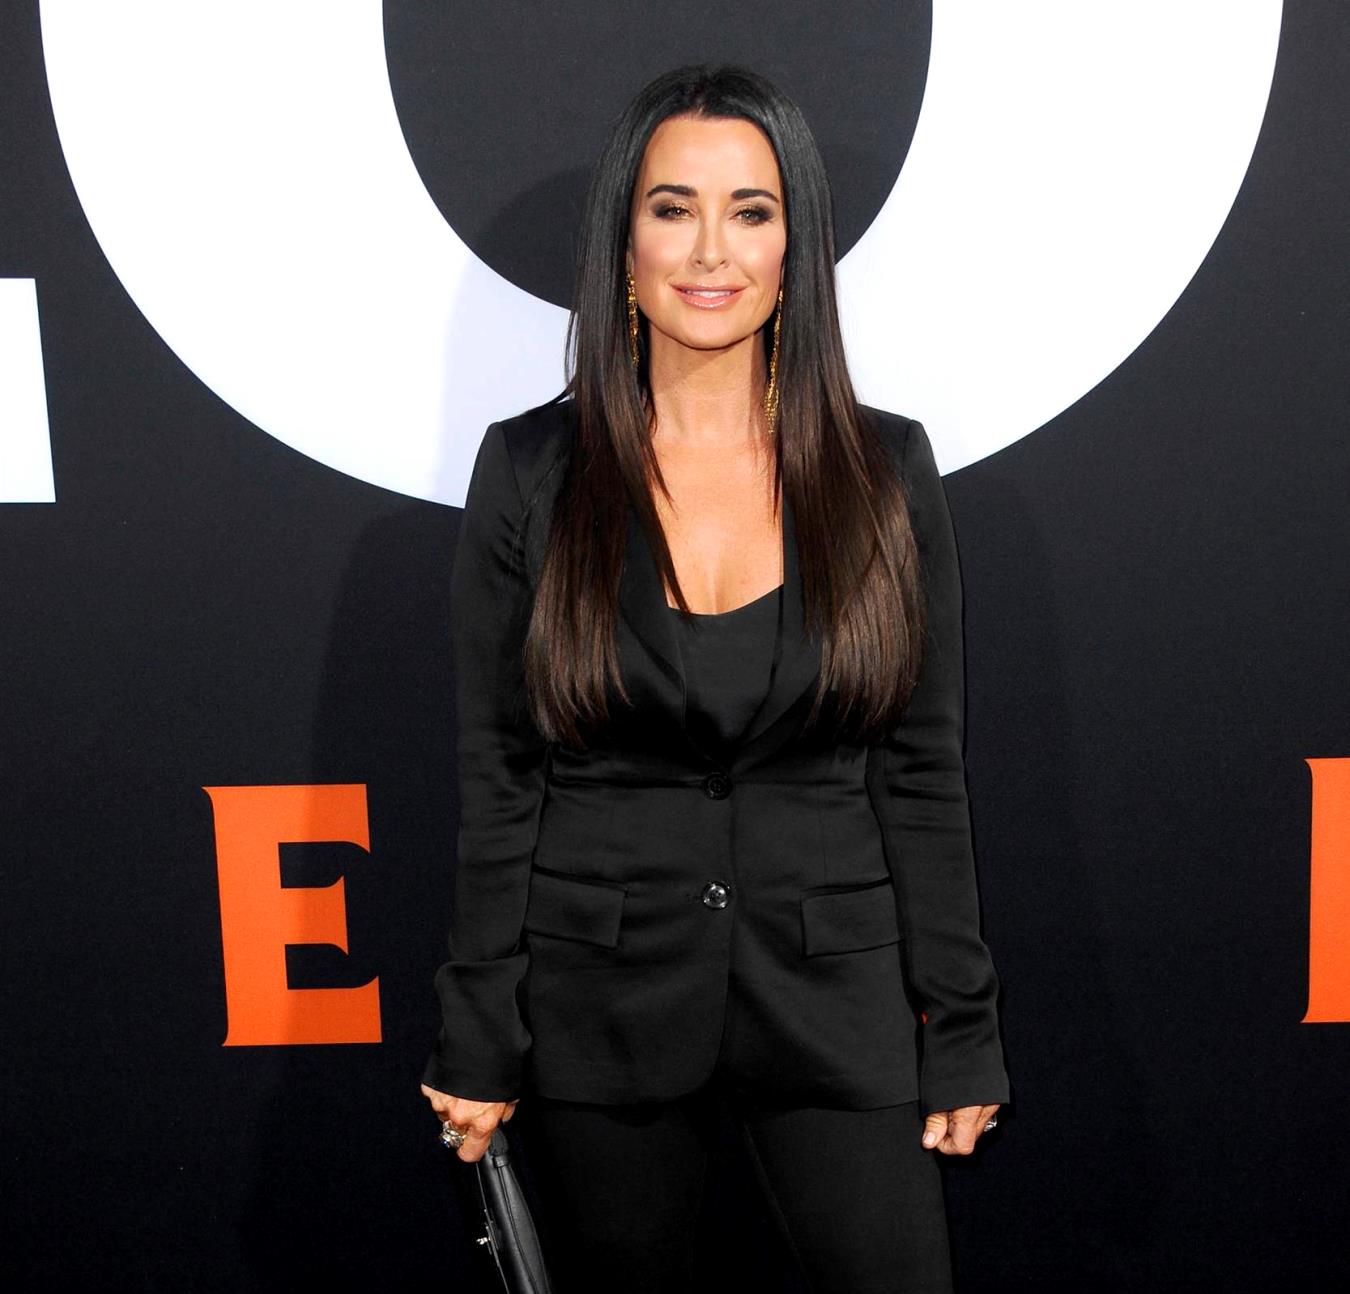 RHOBH Star Kyle Richards to Launch New Clothing Line at NY Fashion Week, Plus Find Out Which Classic Movie Role She'll Be Reprising